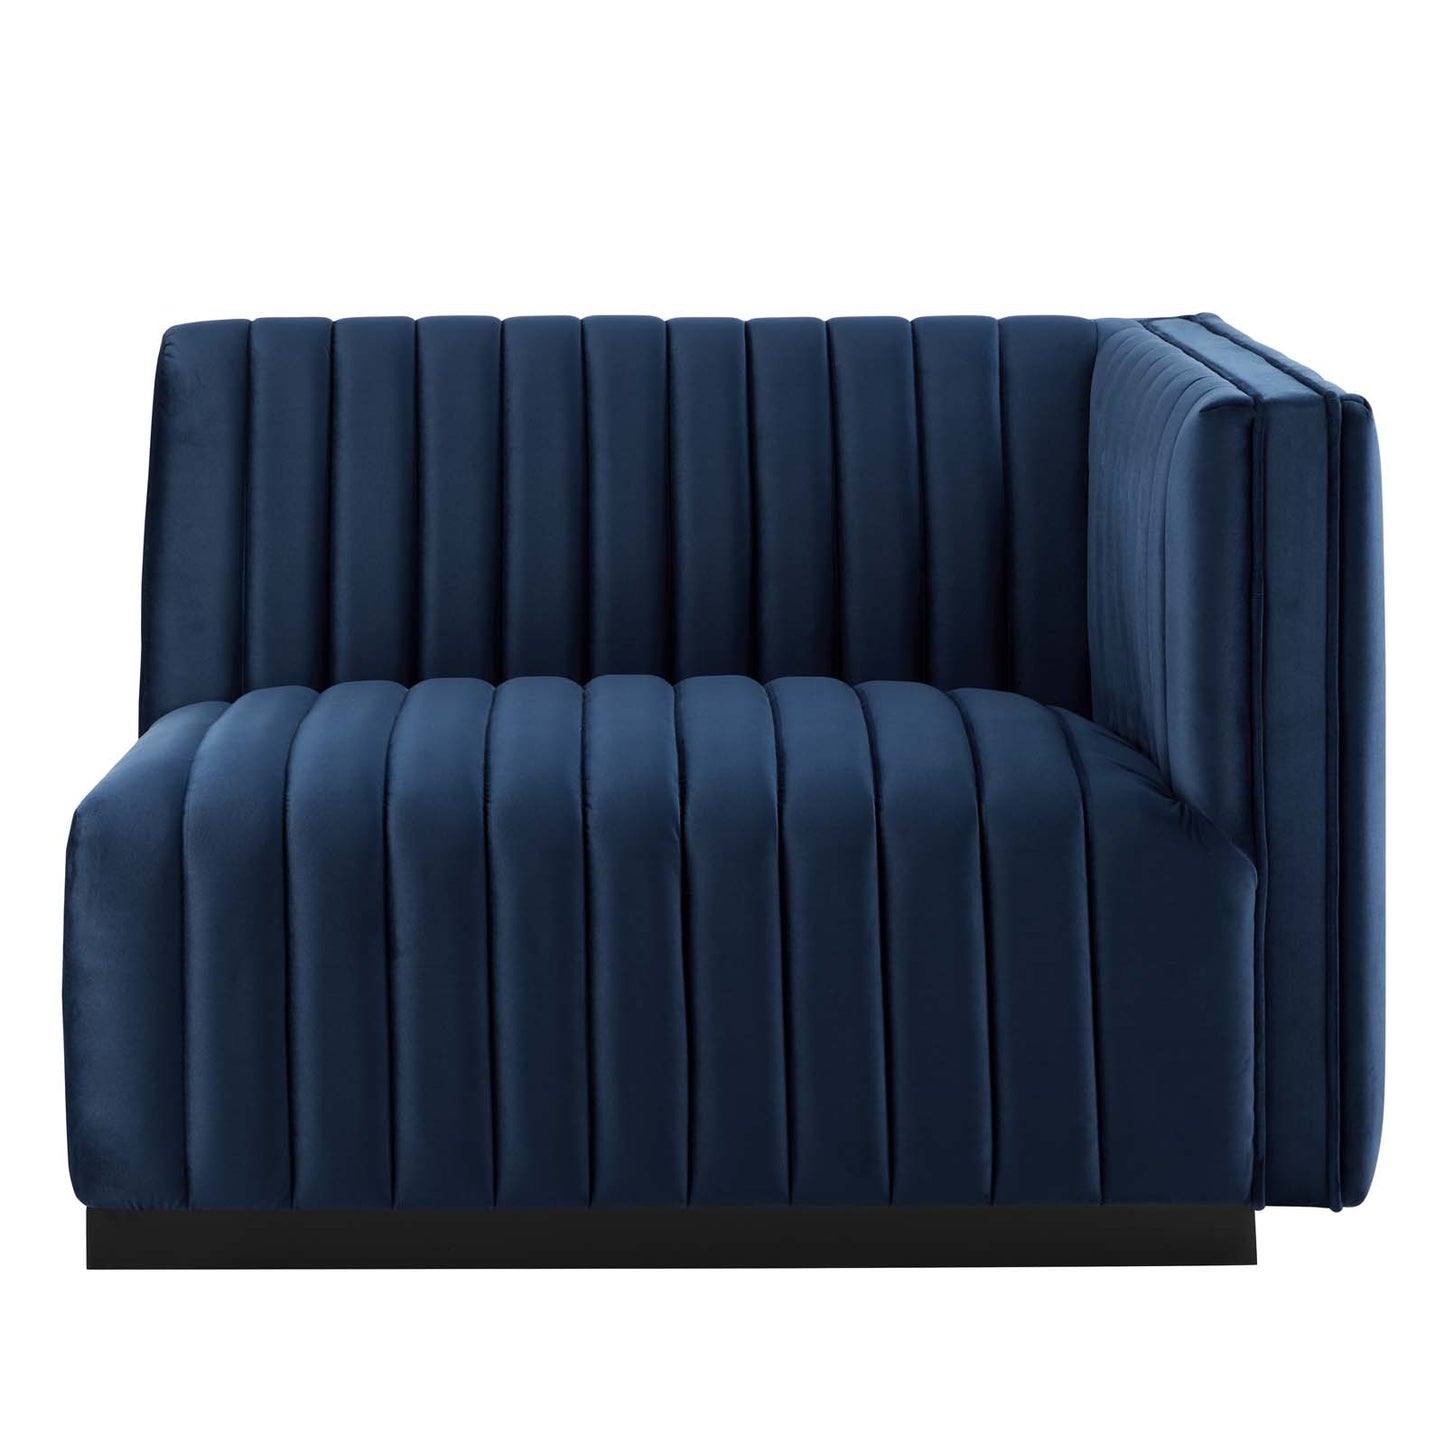 Conjure Channel Tufted Performance Velvet Right-Arm Chair Black Midnight Blue EEI-5492-BLK-MID